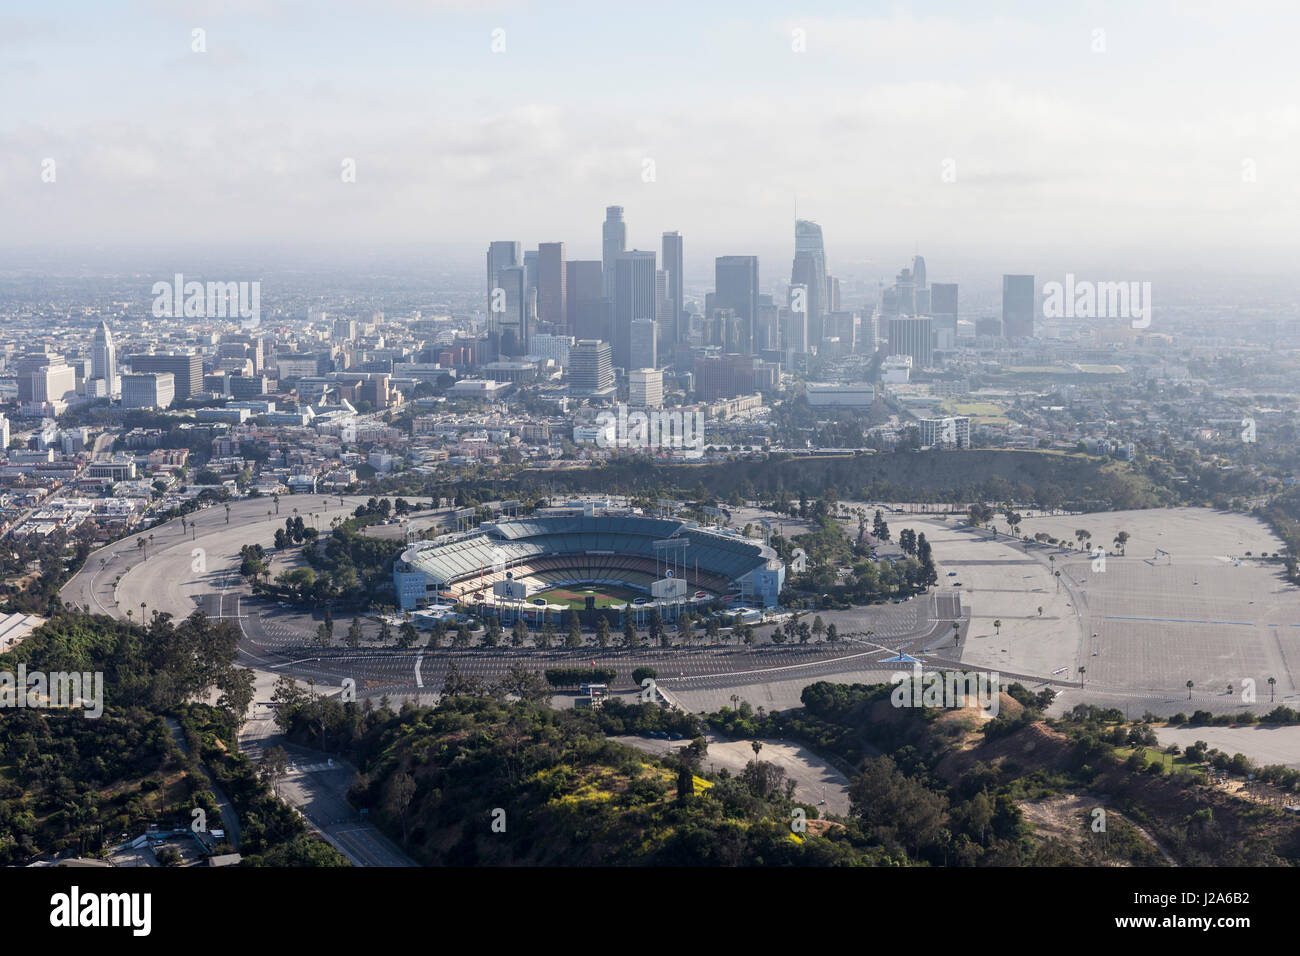 Los Angeles, California, USA - April 12, 2017:  Aerial view of the historic Dodger Stadium with hazy downtown towers in background. Stock Photo